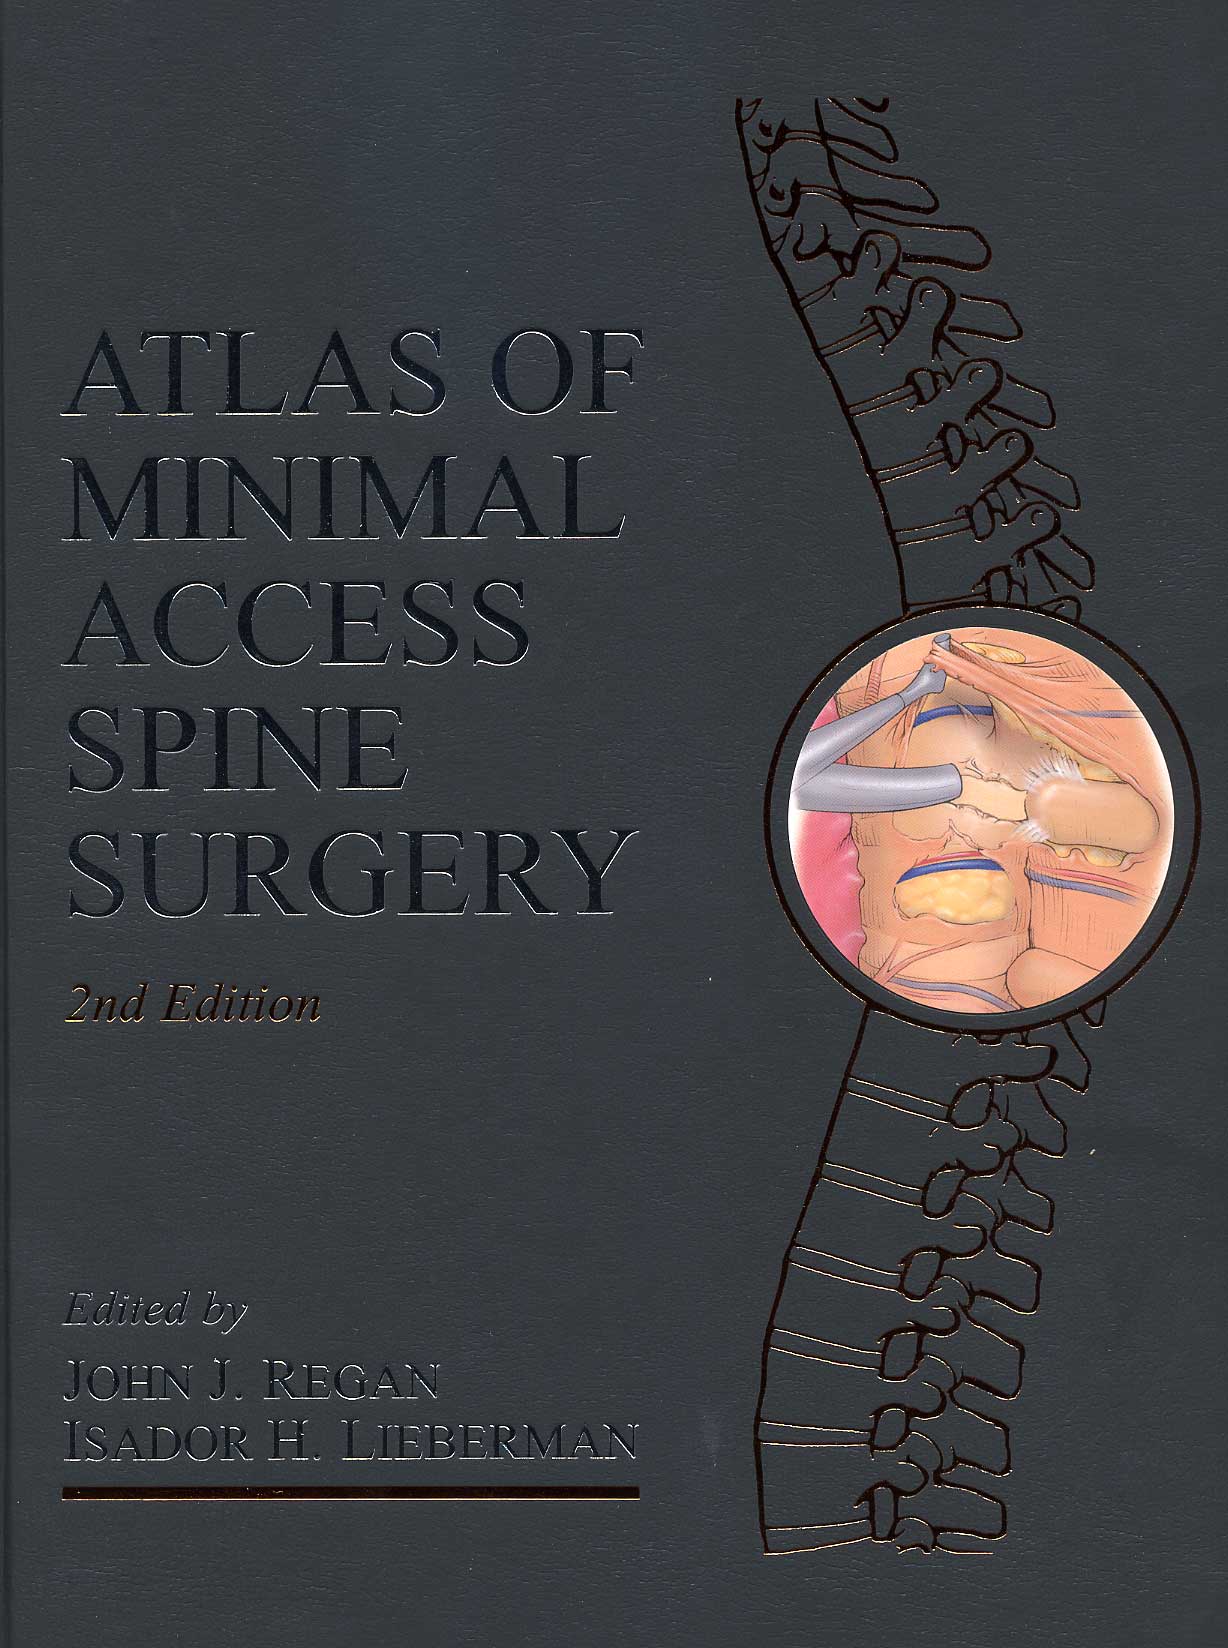 Atlas of Minimal Access Spine Surgery, 2nd edition